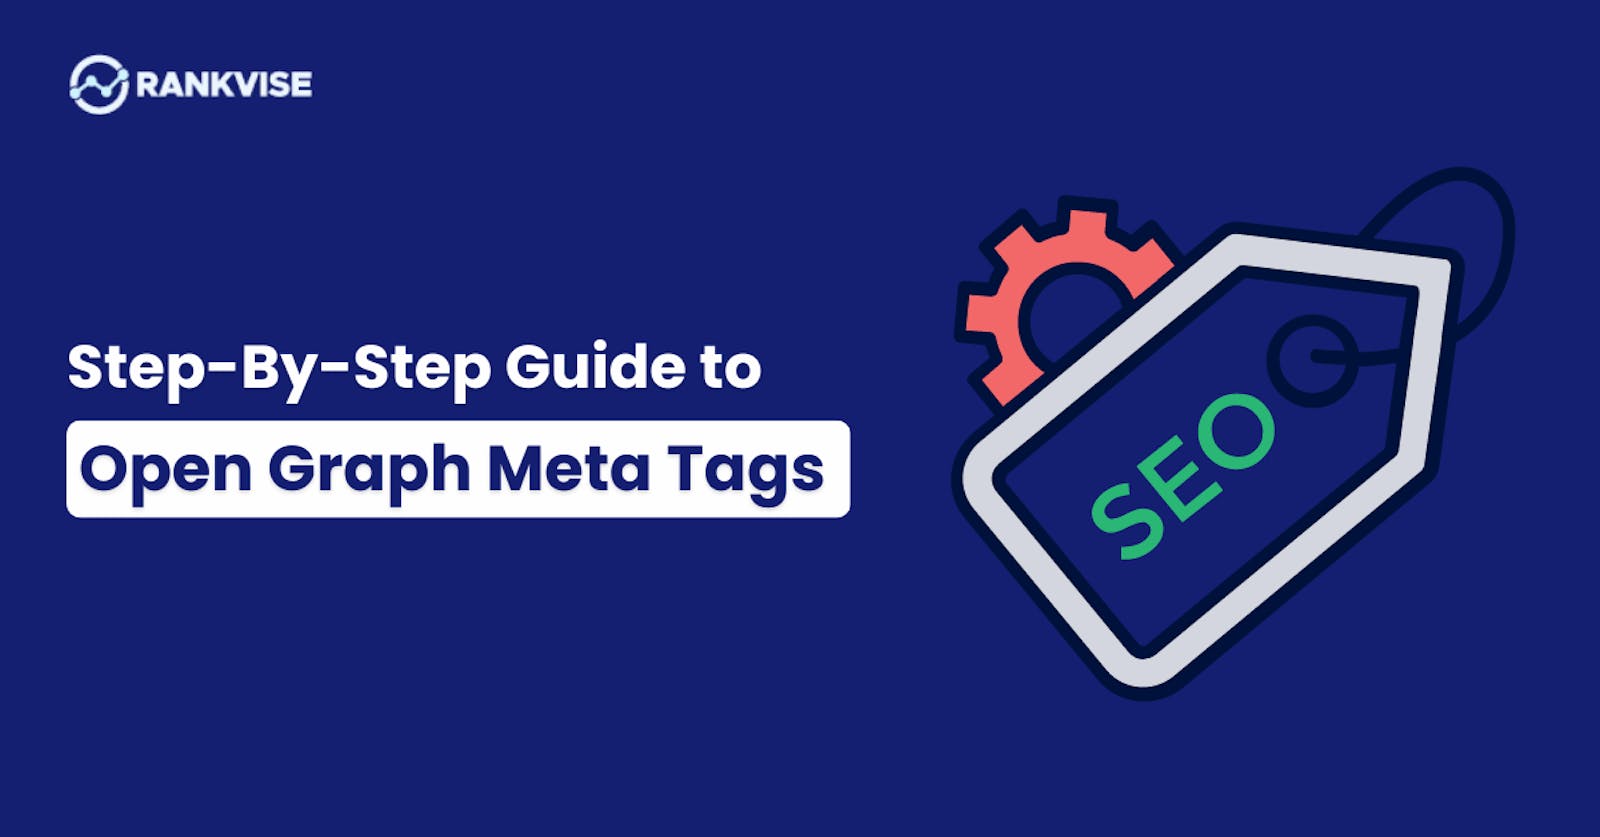 Step-By-Step Guide to Quickly Generating Open Graph Meta Tags